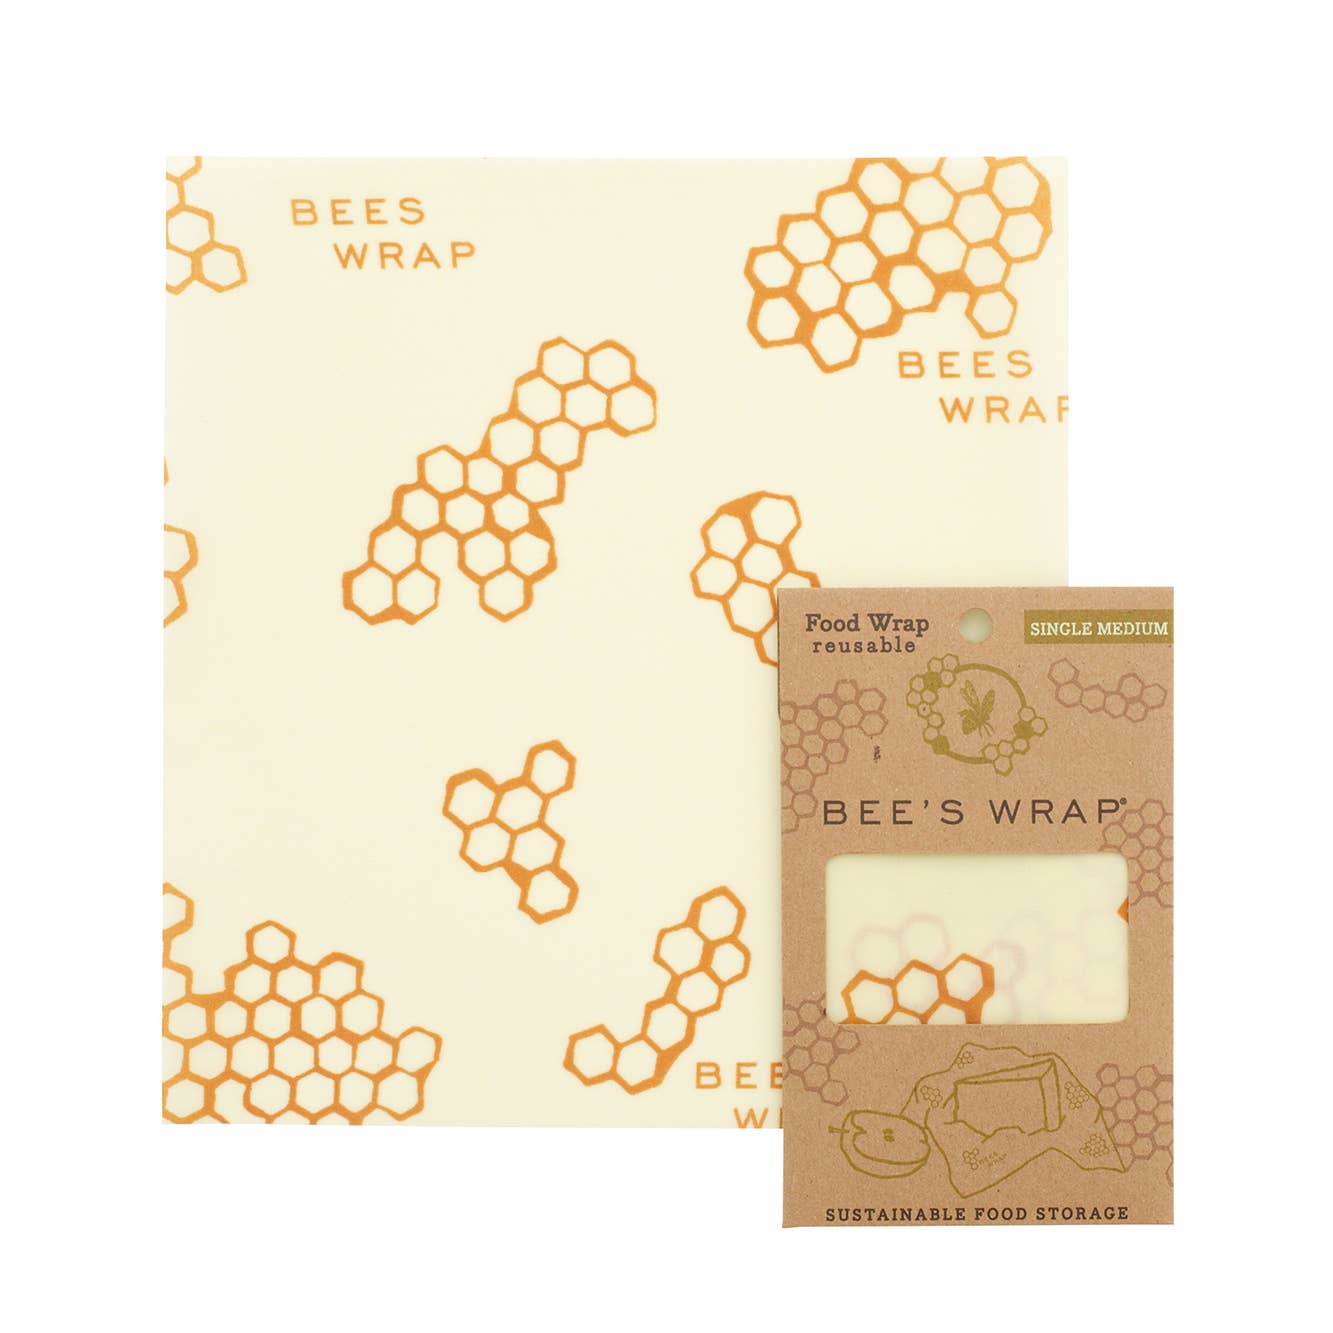 Zero Waste Bali - Did you know that beeswax works like a magic for